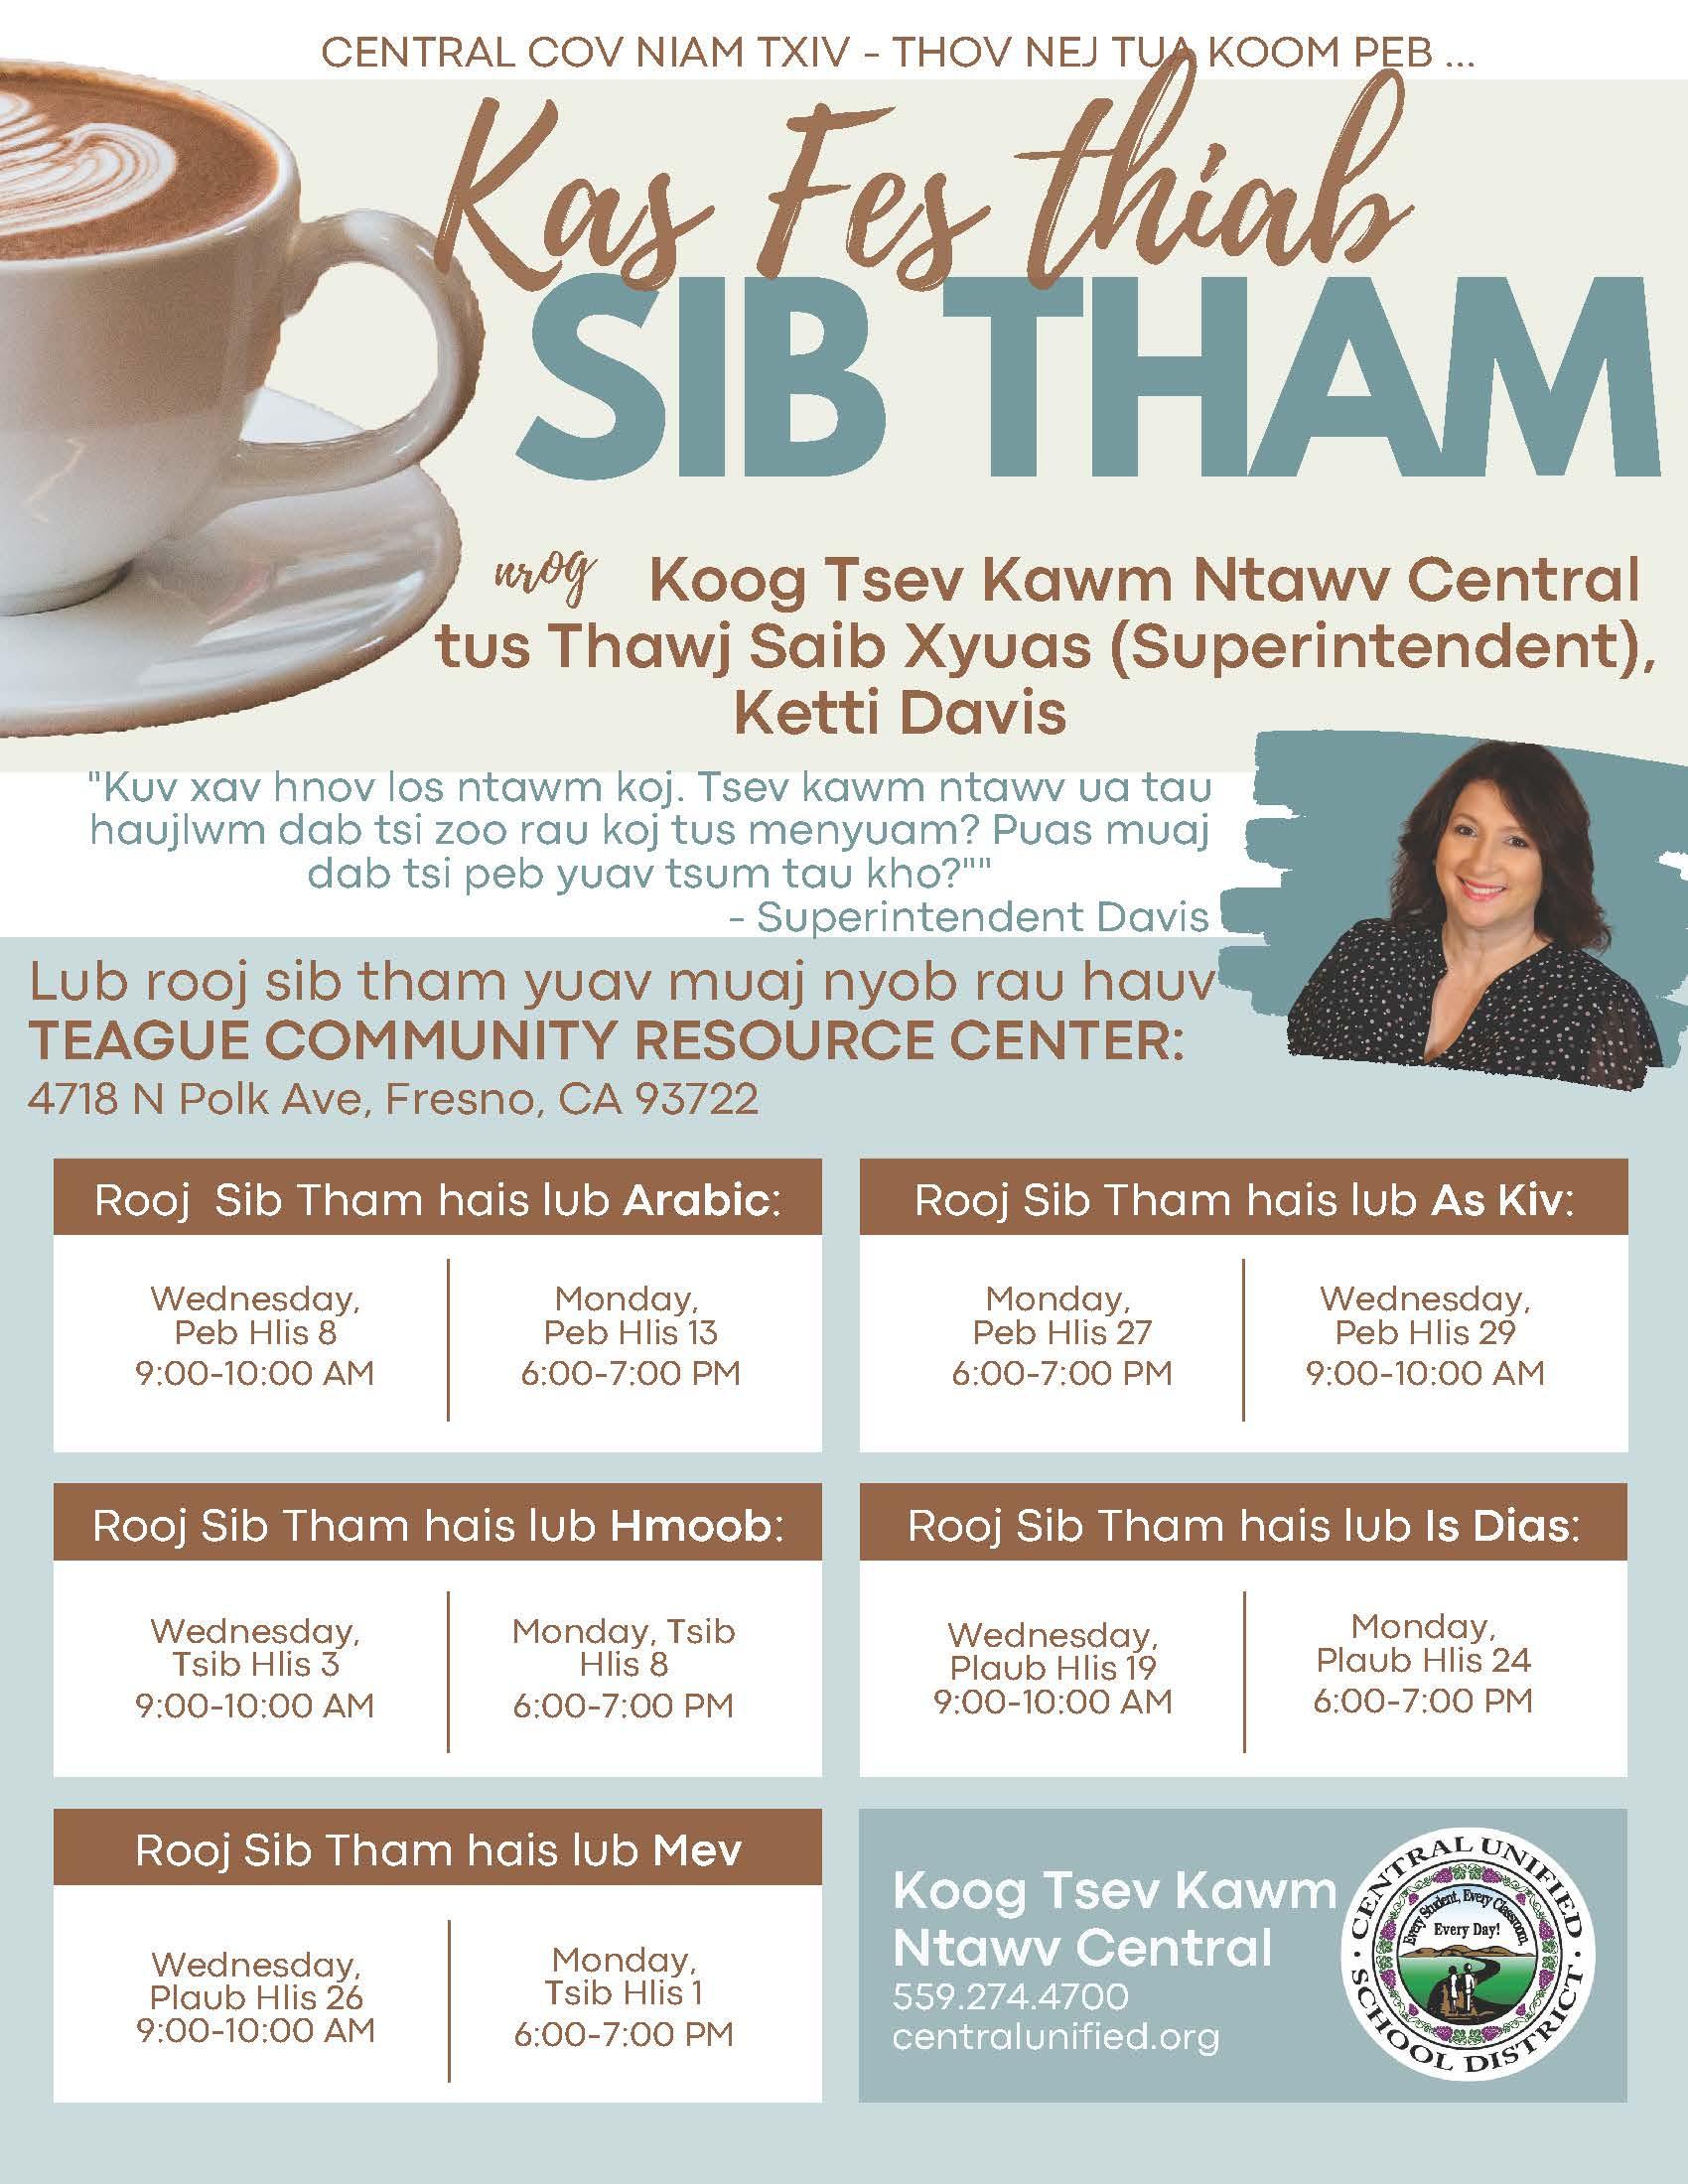 coffee chat flyer in Hmong